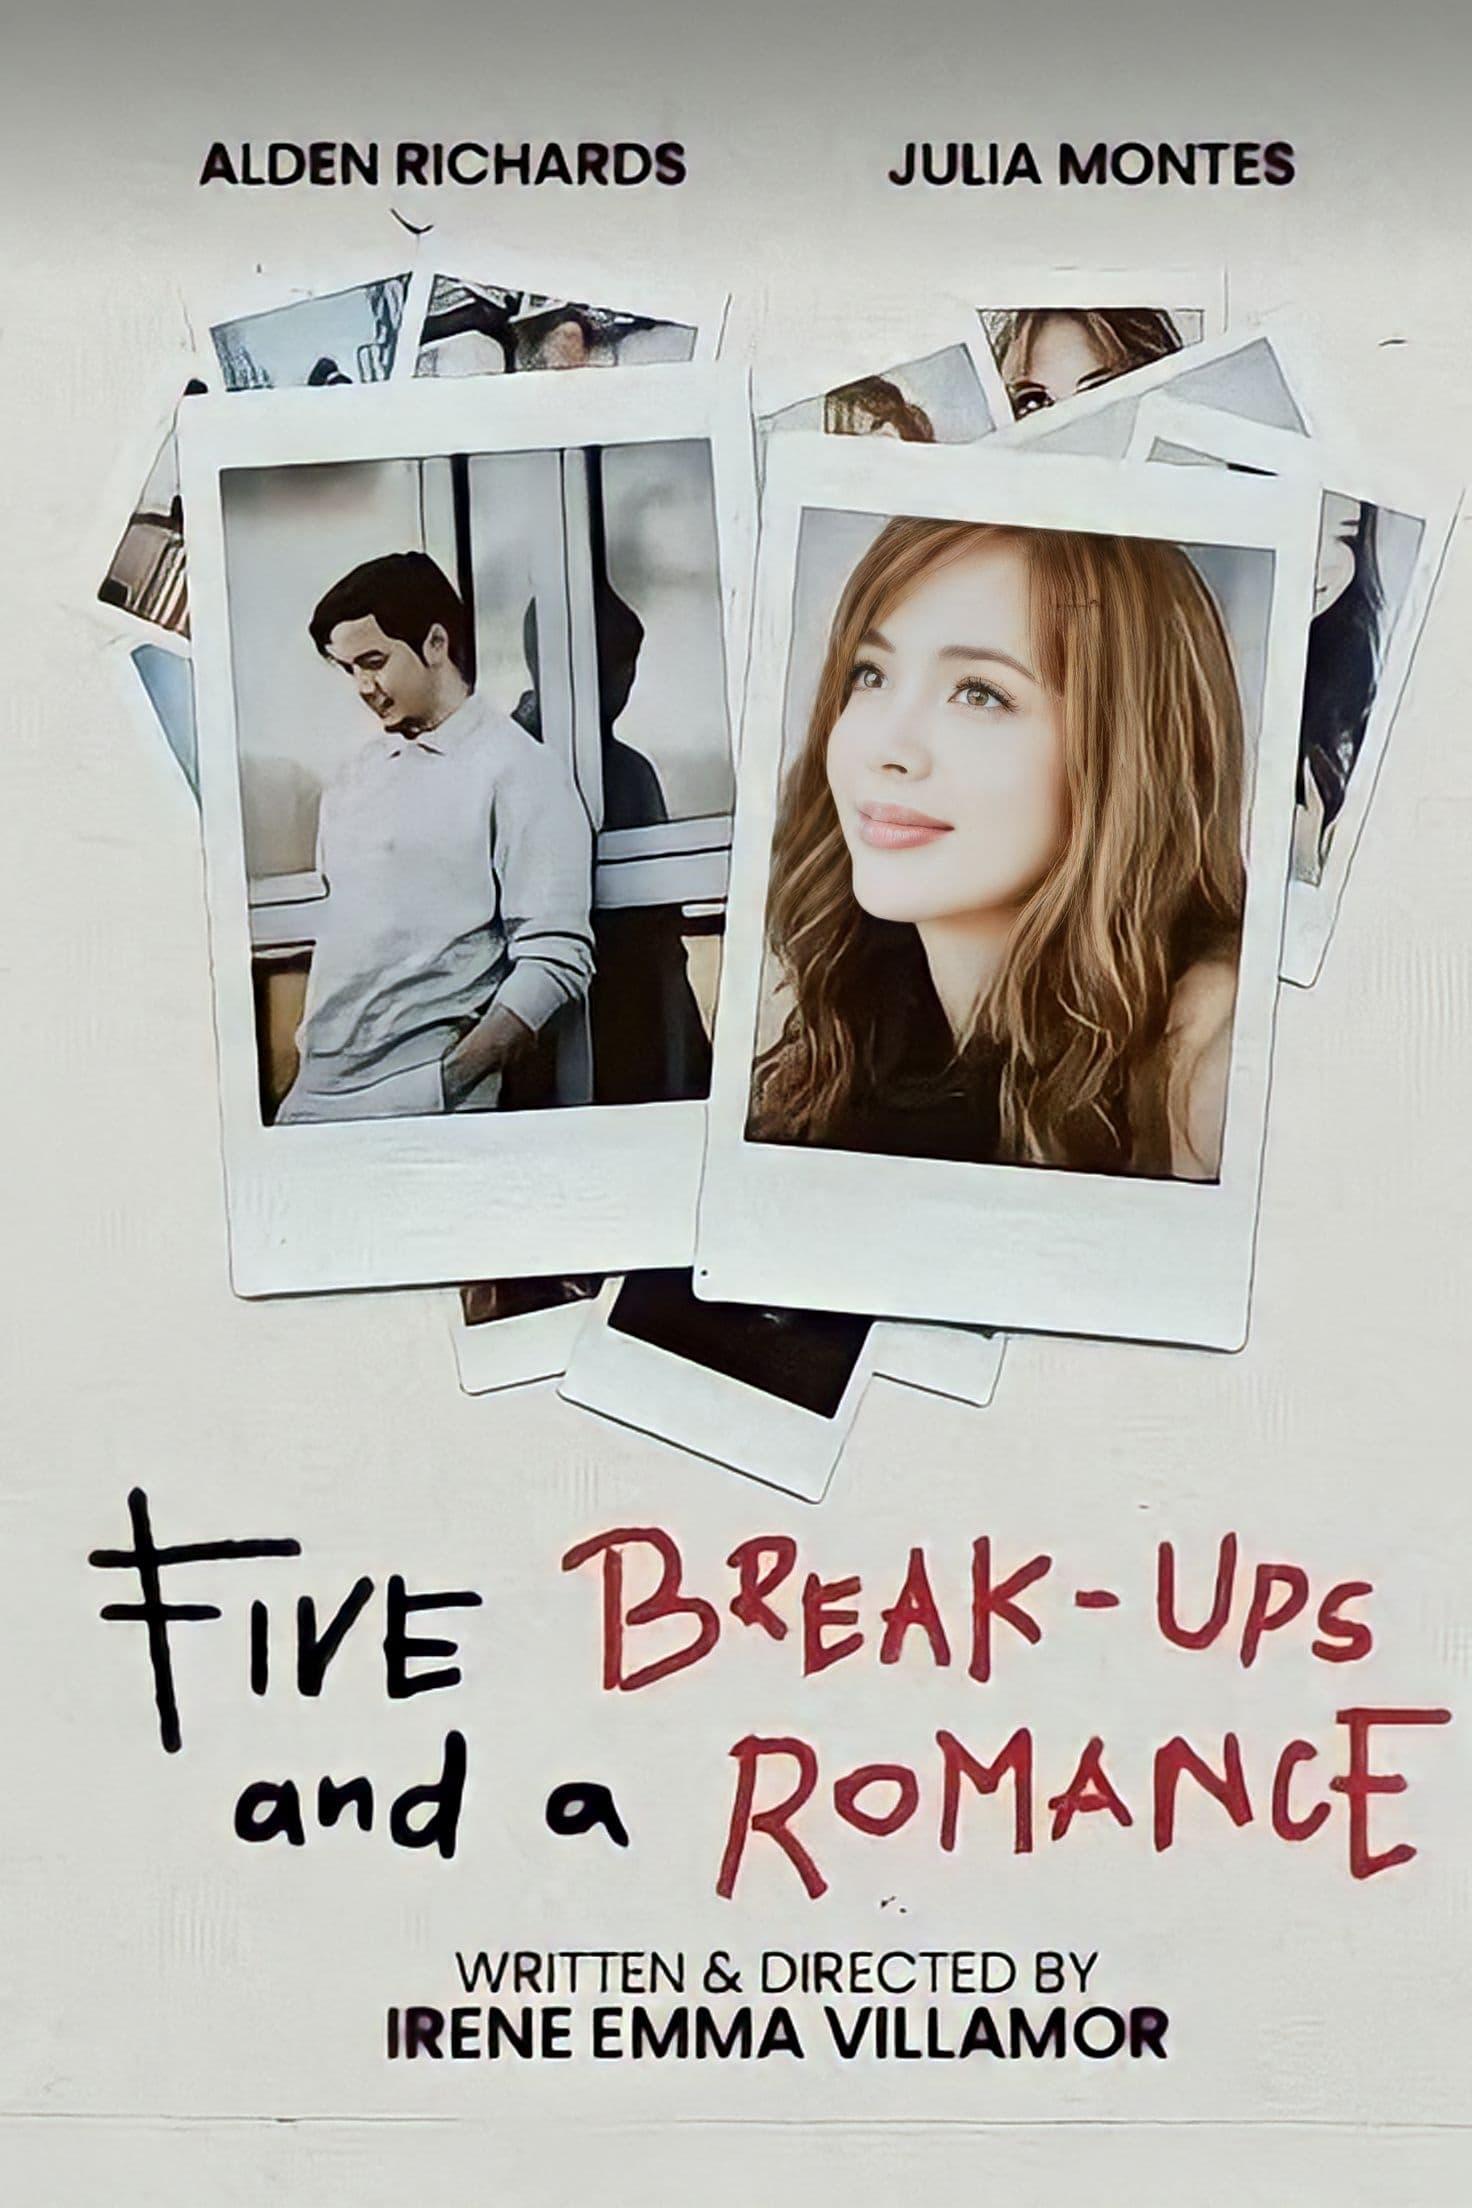 Five Breakups and a Romance poster